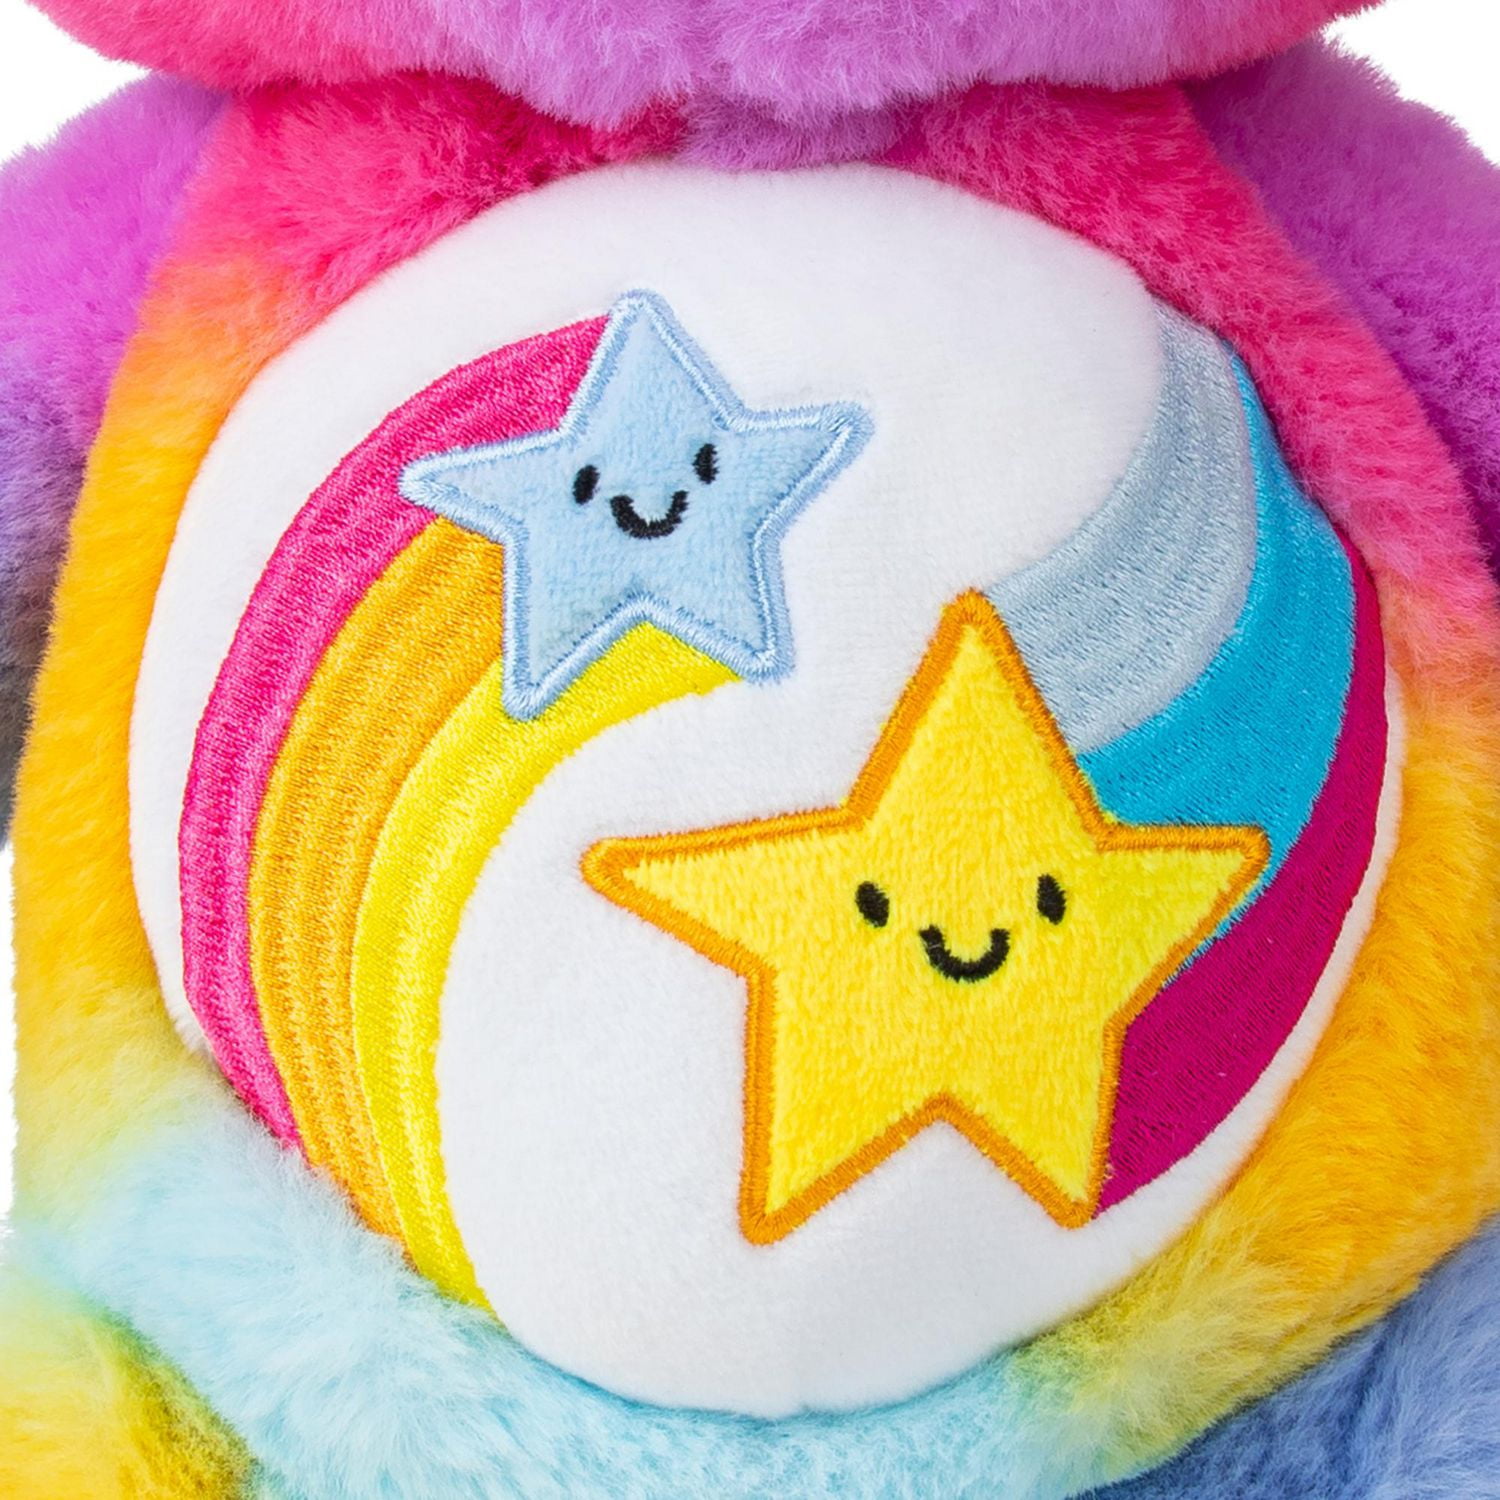 Care Bears 14 Bedtime Collector Edition Plush - Limited Edition Design,  Bedtime Bear 14 Plush 